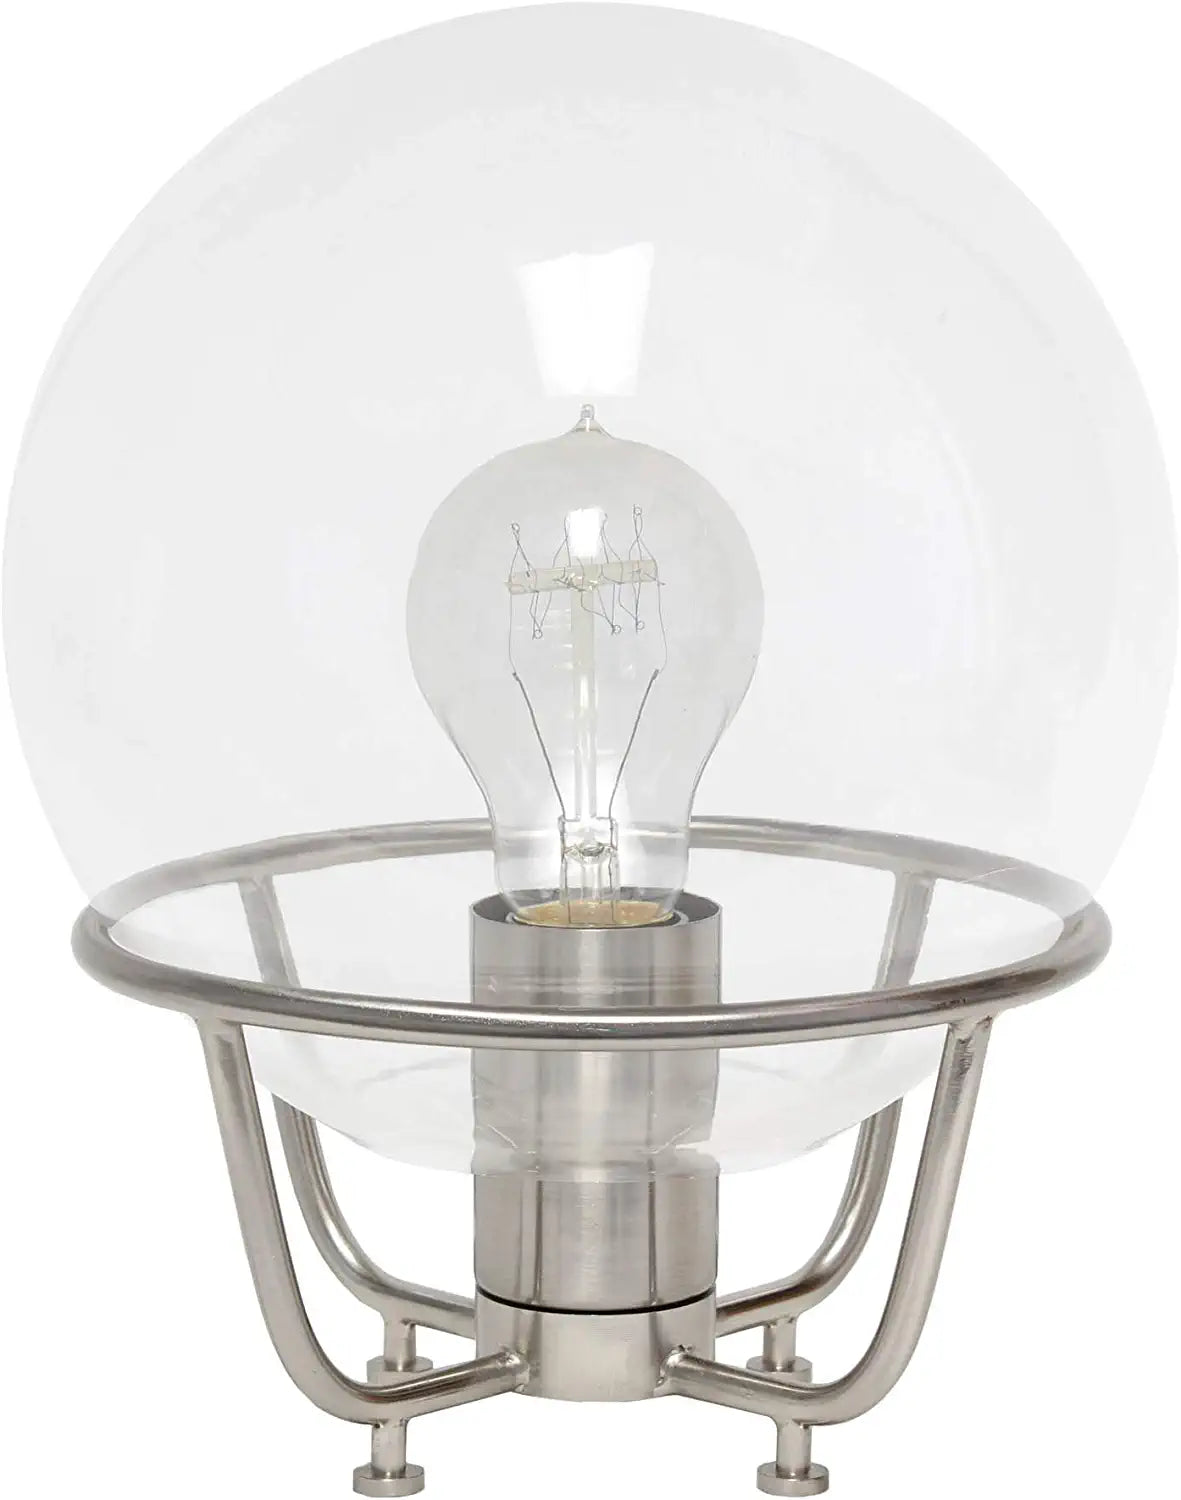 Lalia Home Decorative Old World Globe Glass Table Lamp, Brushed Nickel